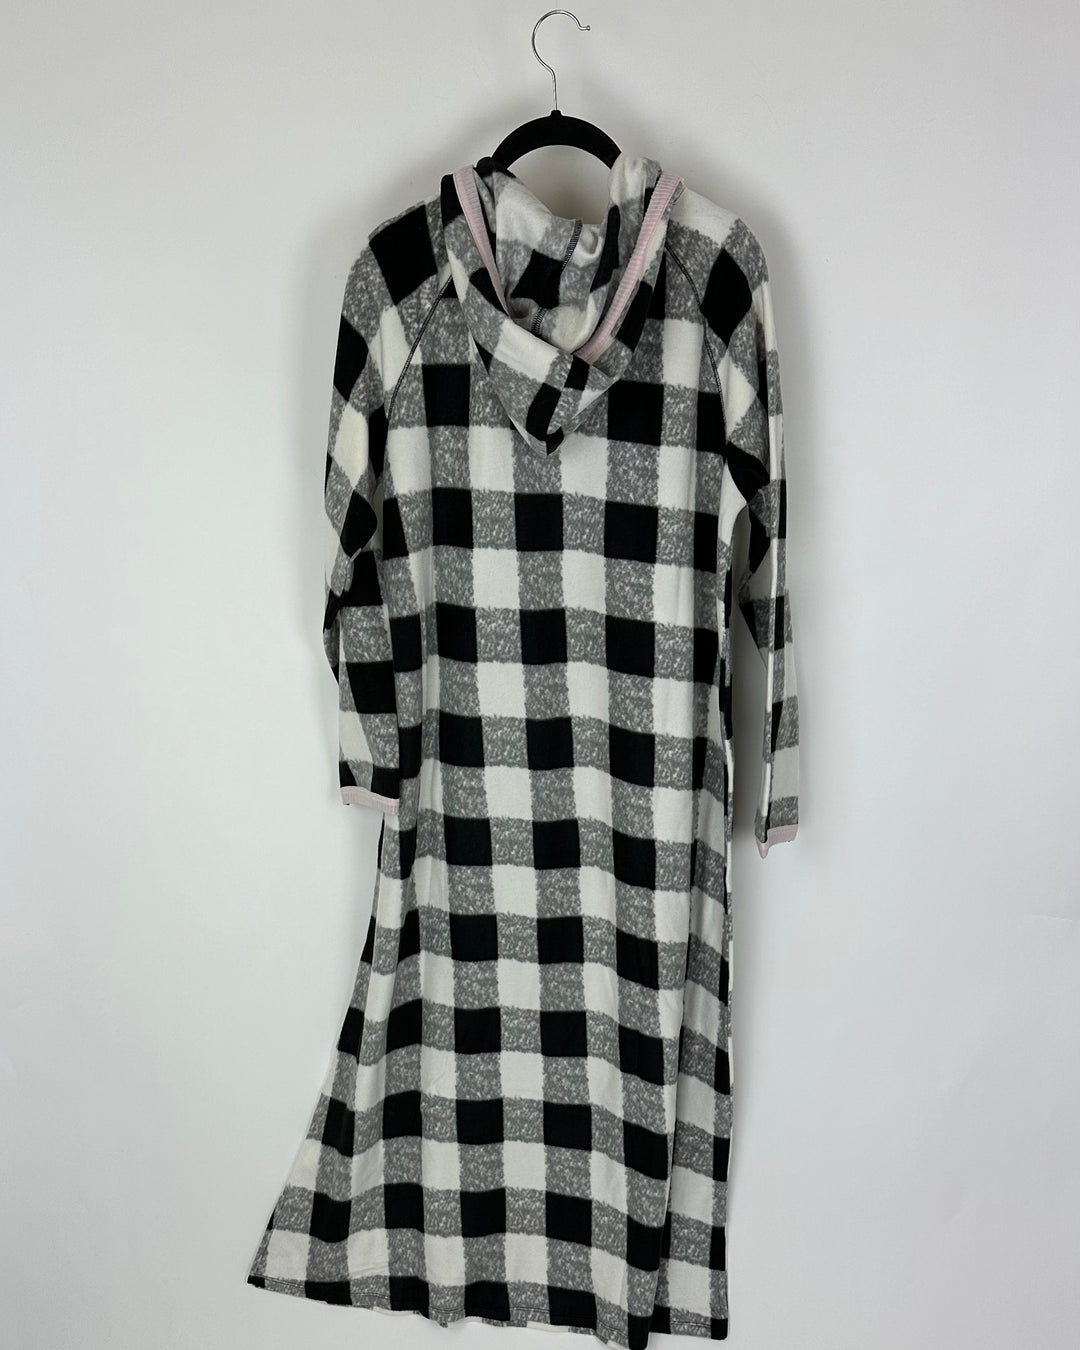 Black And White Plaid Lounge Dress - Size 6/8 and 10/12